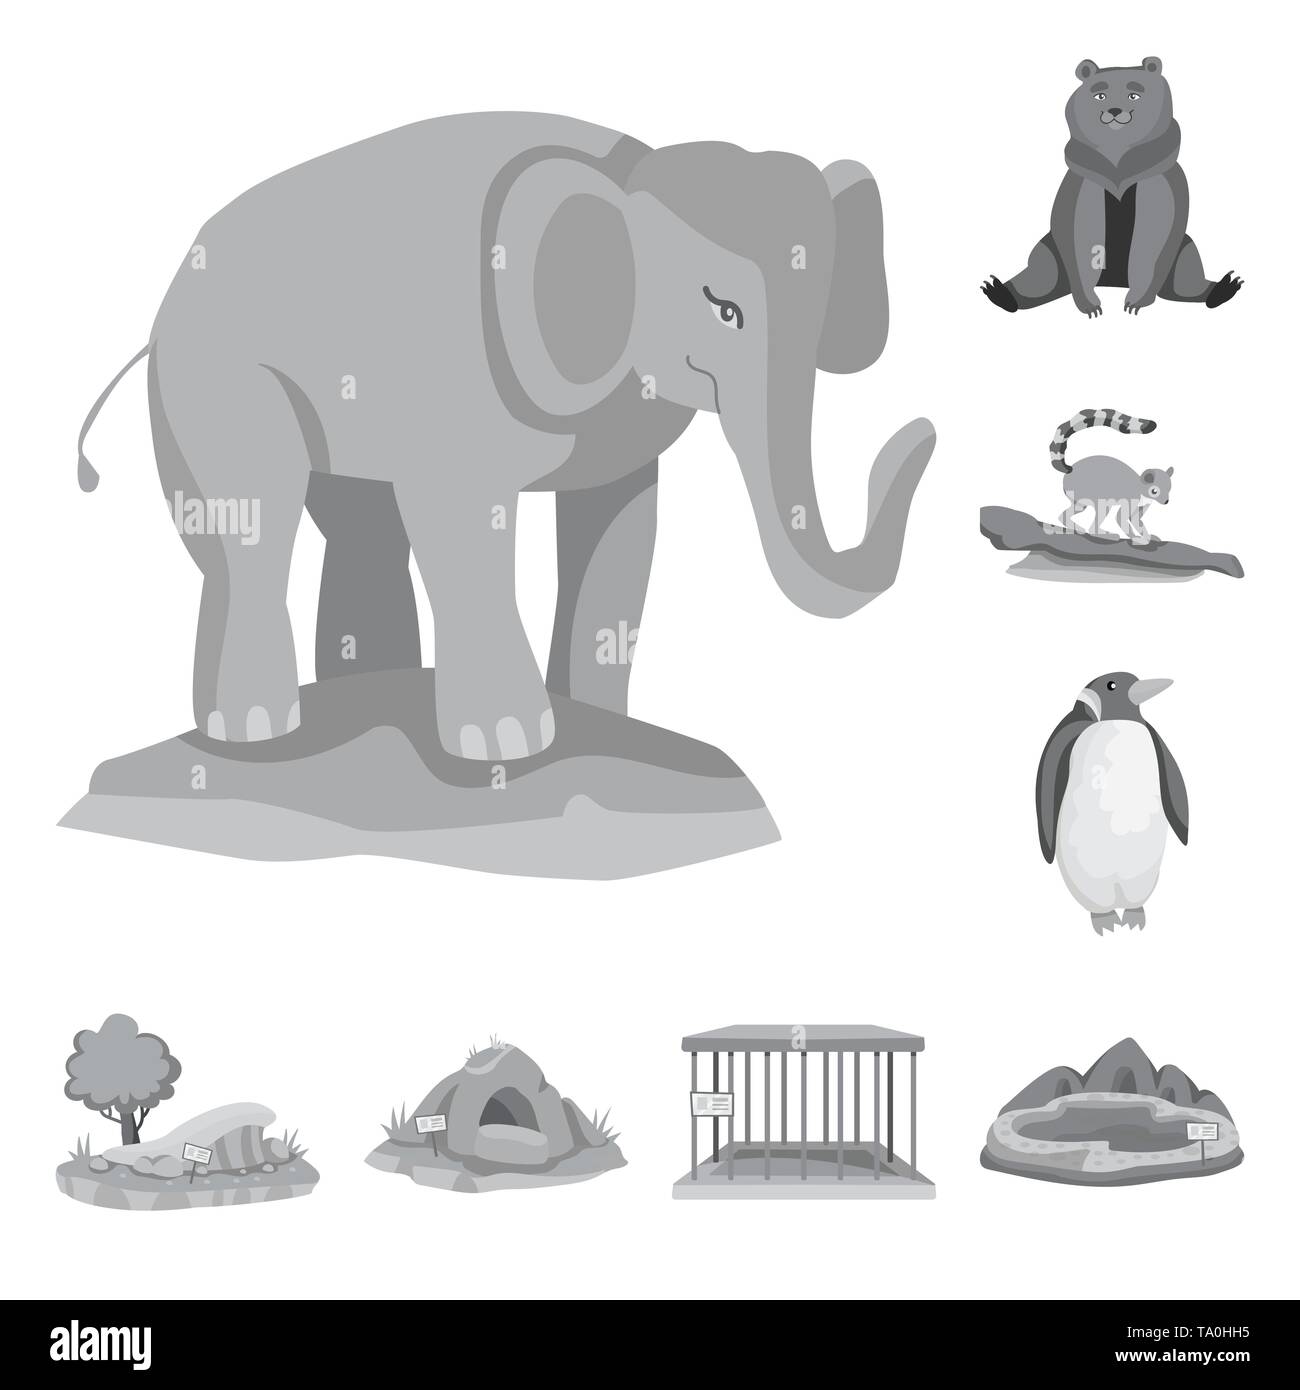 elephant,bear,lemur,penguin,trees,cave,cell,lake,cute,brown,monkey,white,sand,empty,pool,jungle,big,sloth,christmas,landscape,grass,protection,pond,trunk,wild,tail,arctic,growth,zoo,park,safari,animal,nature,fun,fauna,entertainment,forest,flora,set,vector,icon,illustration,isolated,collection,design,element,graphic,sign,mono,gray Vector Vectors , Stock Vector